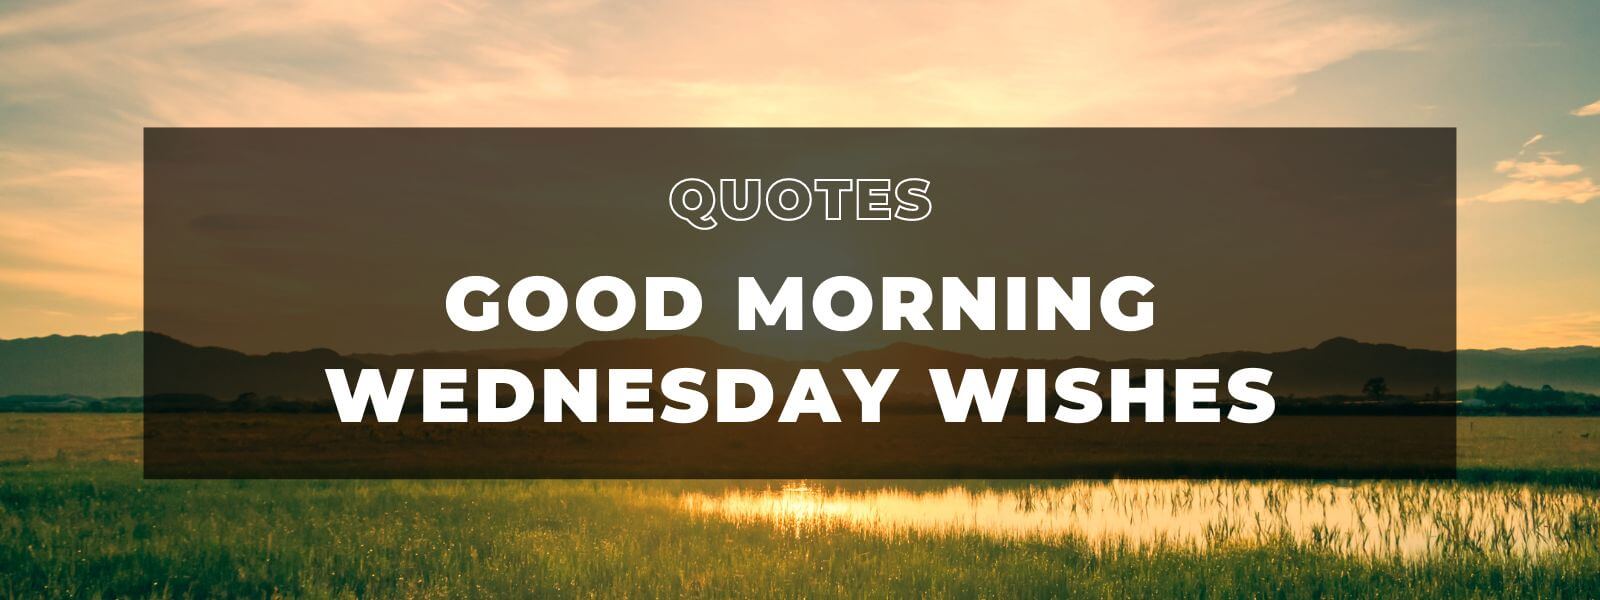 Good morning Wednesday wishes banner